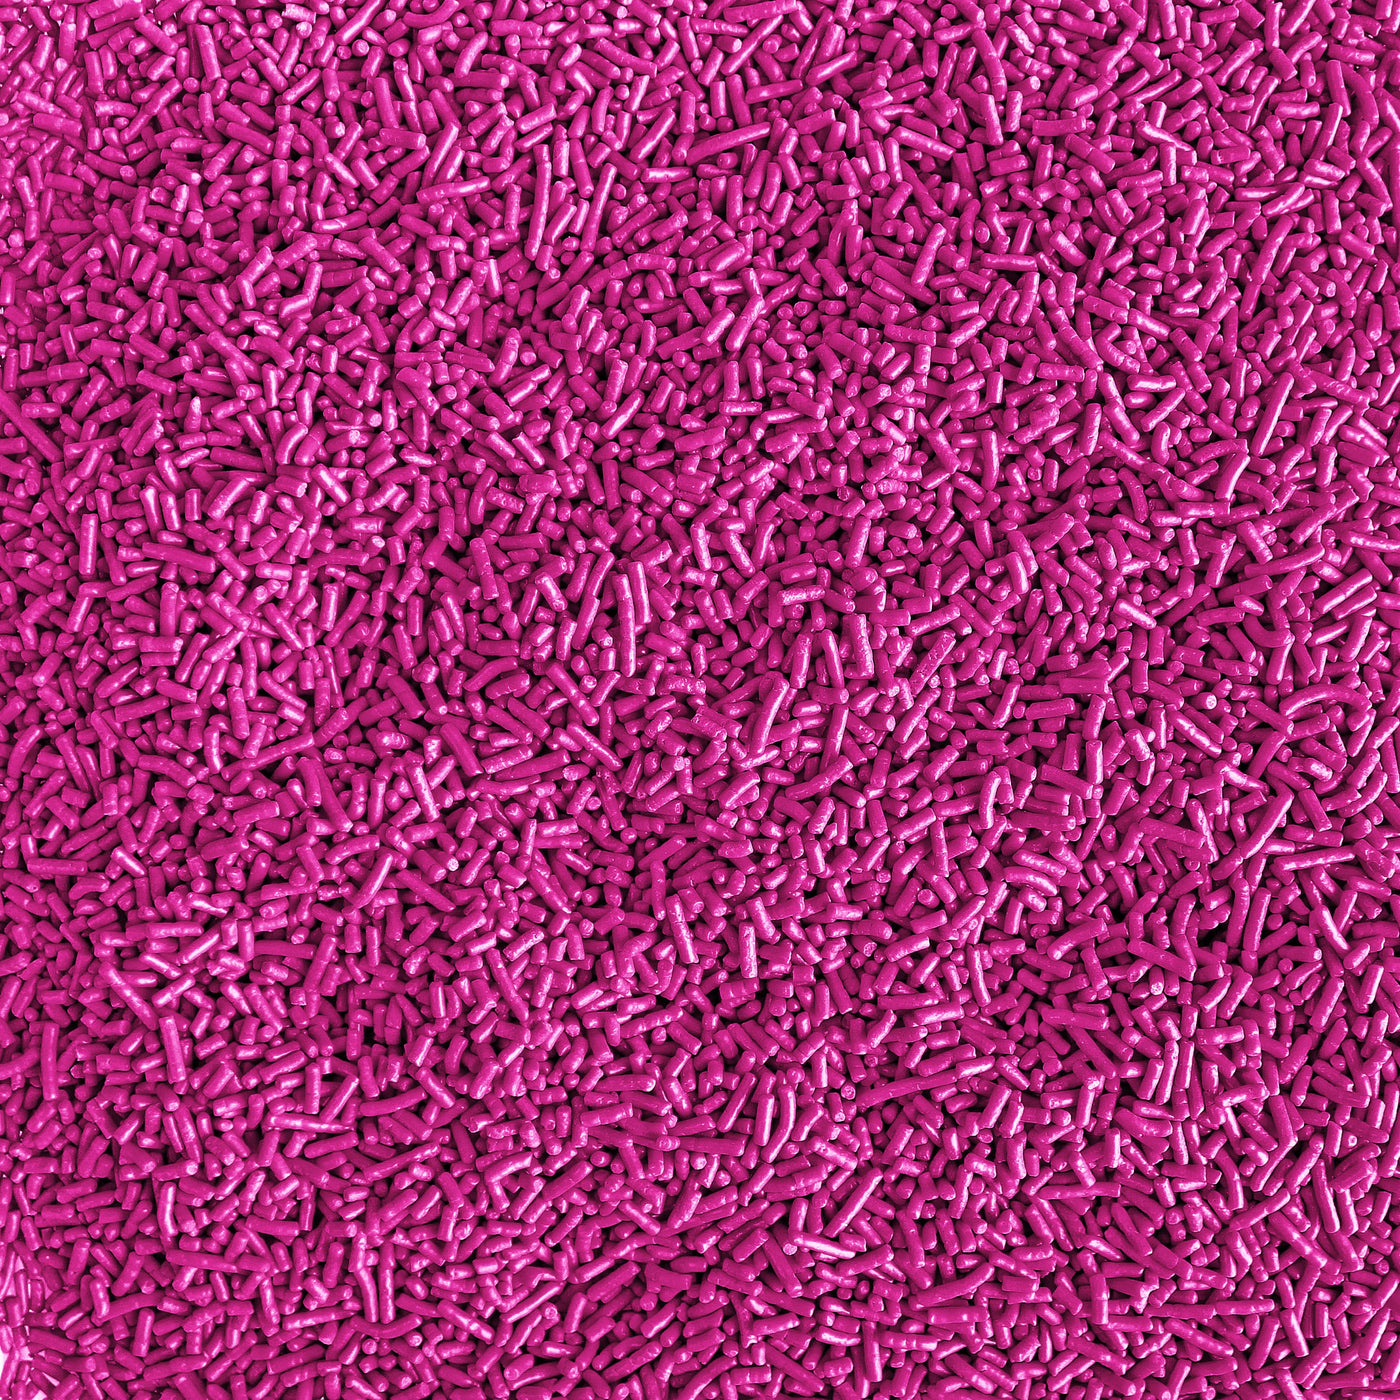 Fuchsia Hot Pink Magenta Sprinkles for decorating cakes, cupcakes, cookies and other desserts